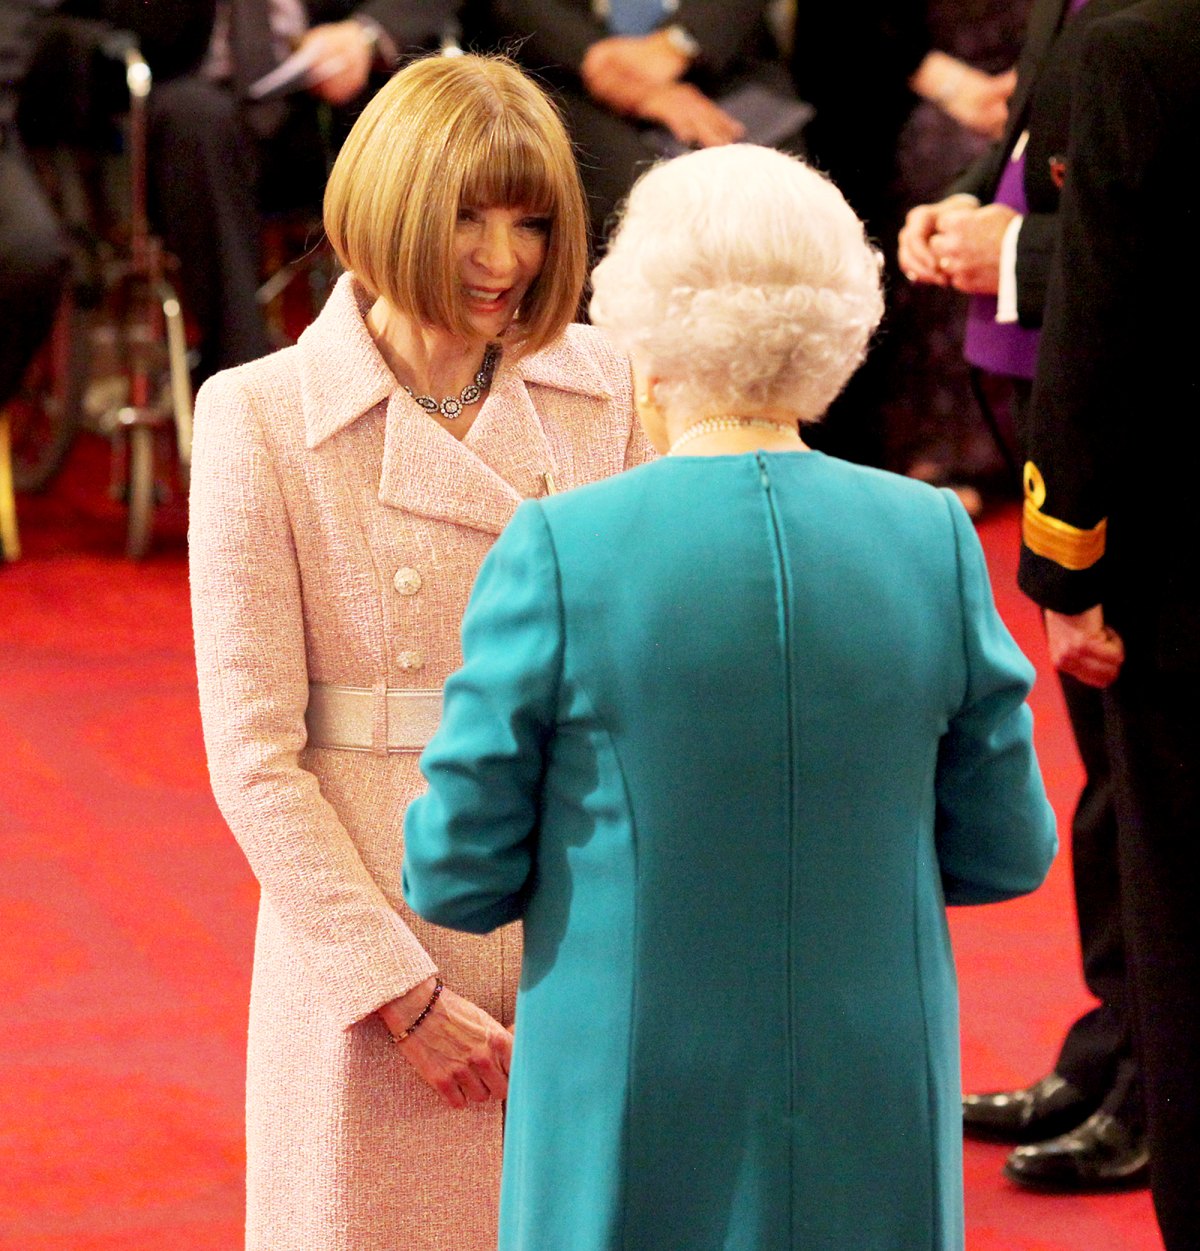 Vogues Anna Wintour Made A Dame By Queen Elizabeth Ii